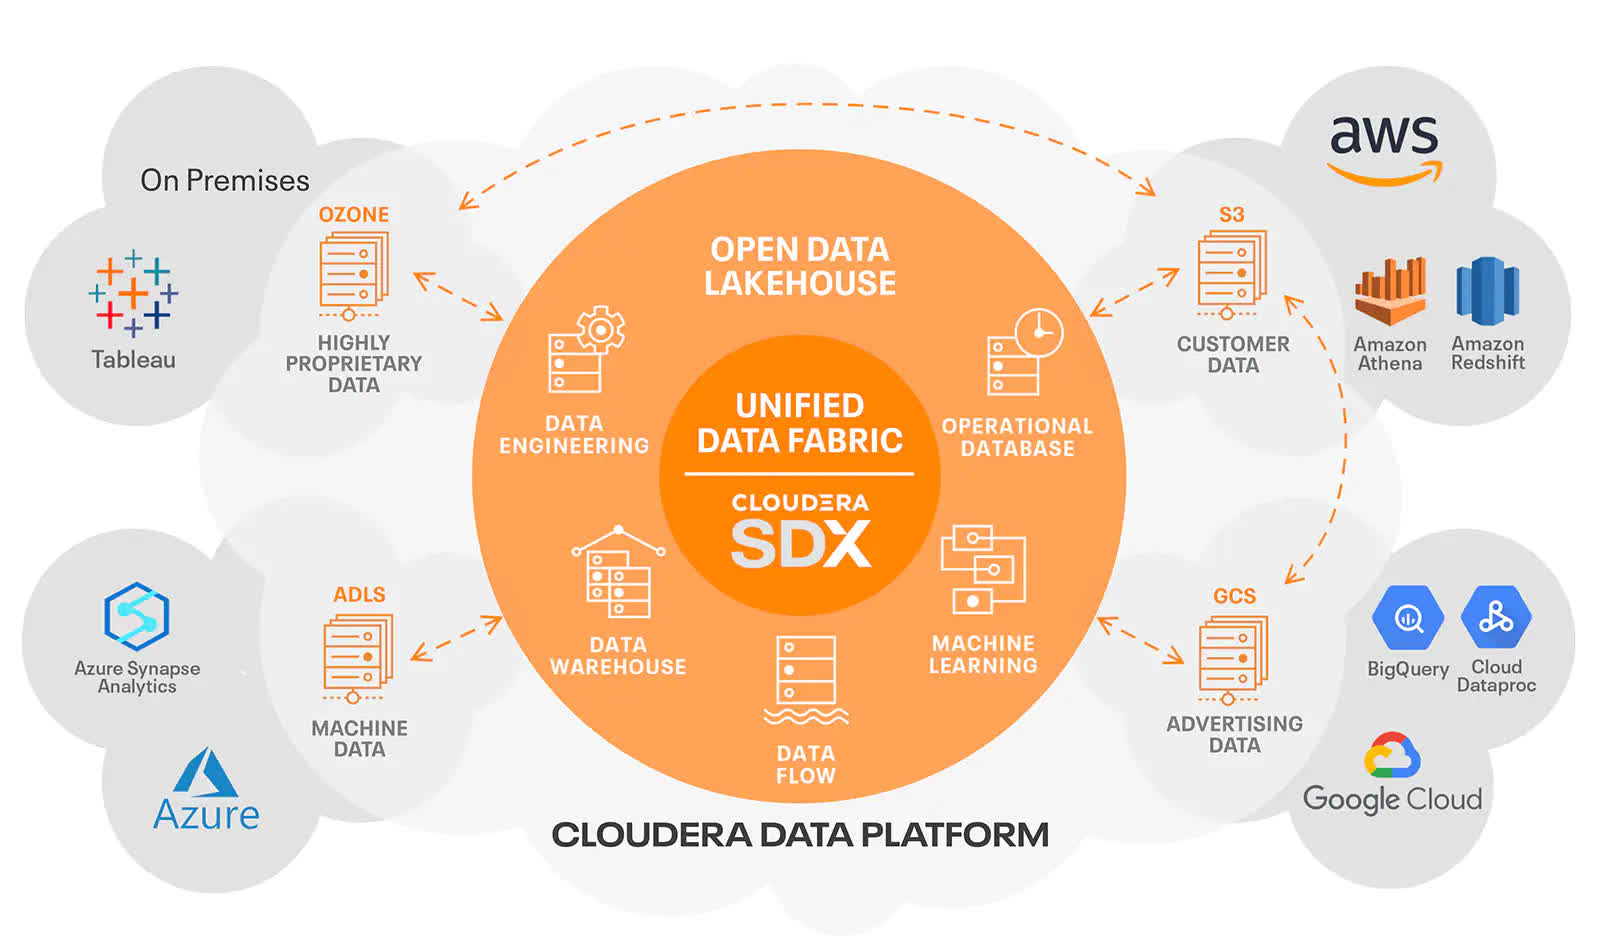 Cloudera extends open data lakehouse benefits to the hybrid cloud